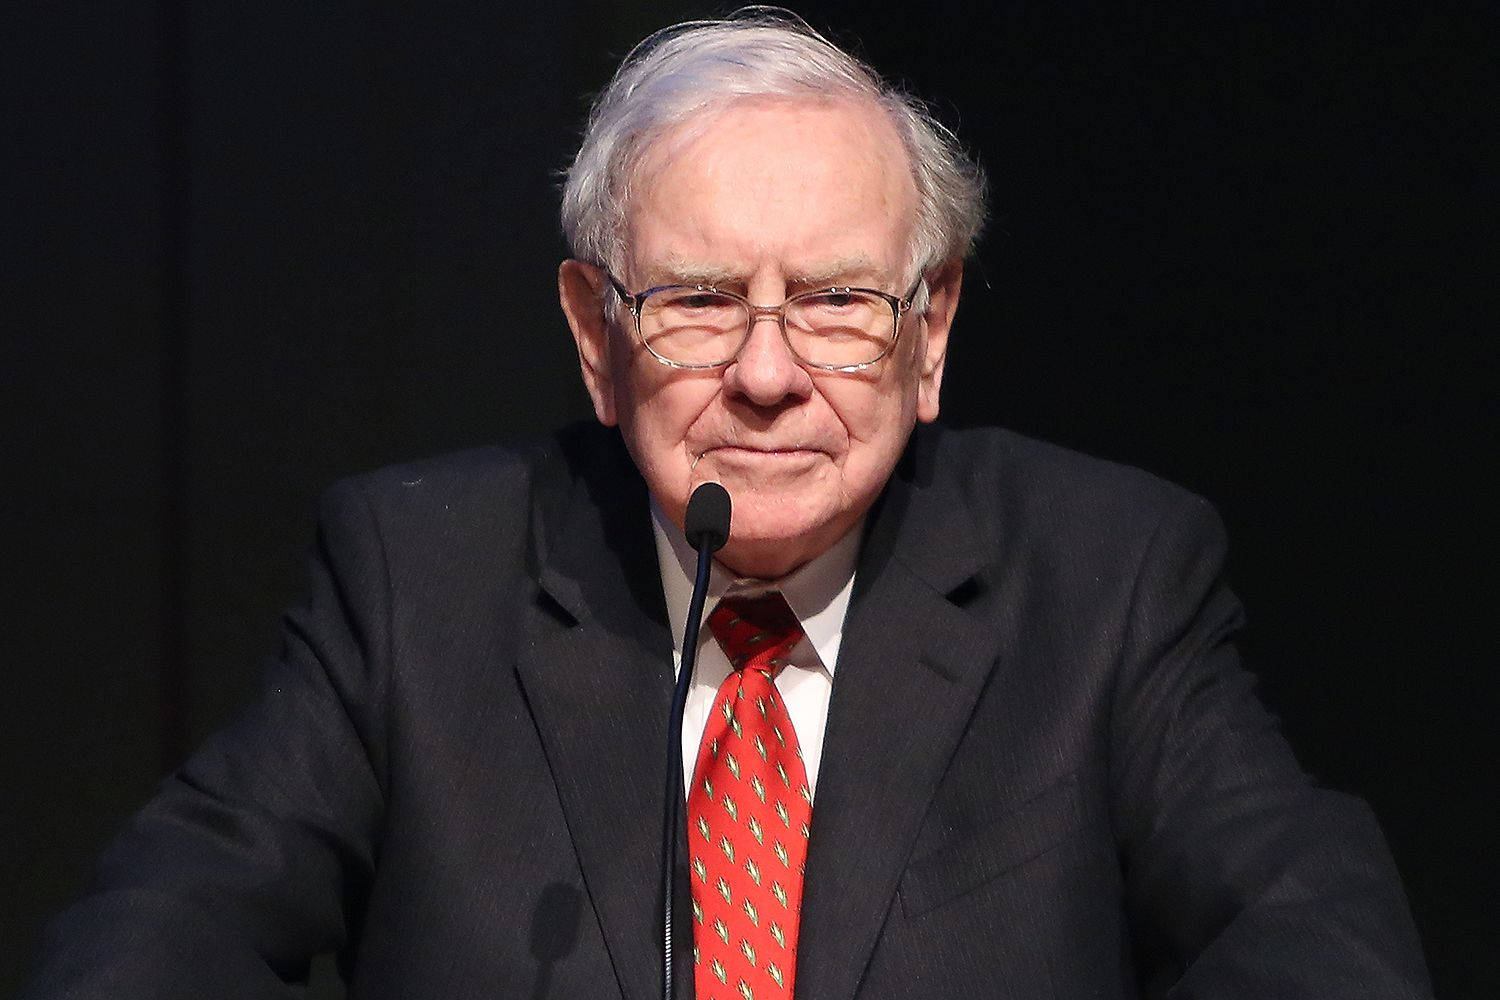 The Oracle of Omaha, Warren Buffett at a Business Conference Wallpaper